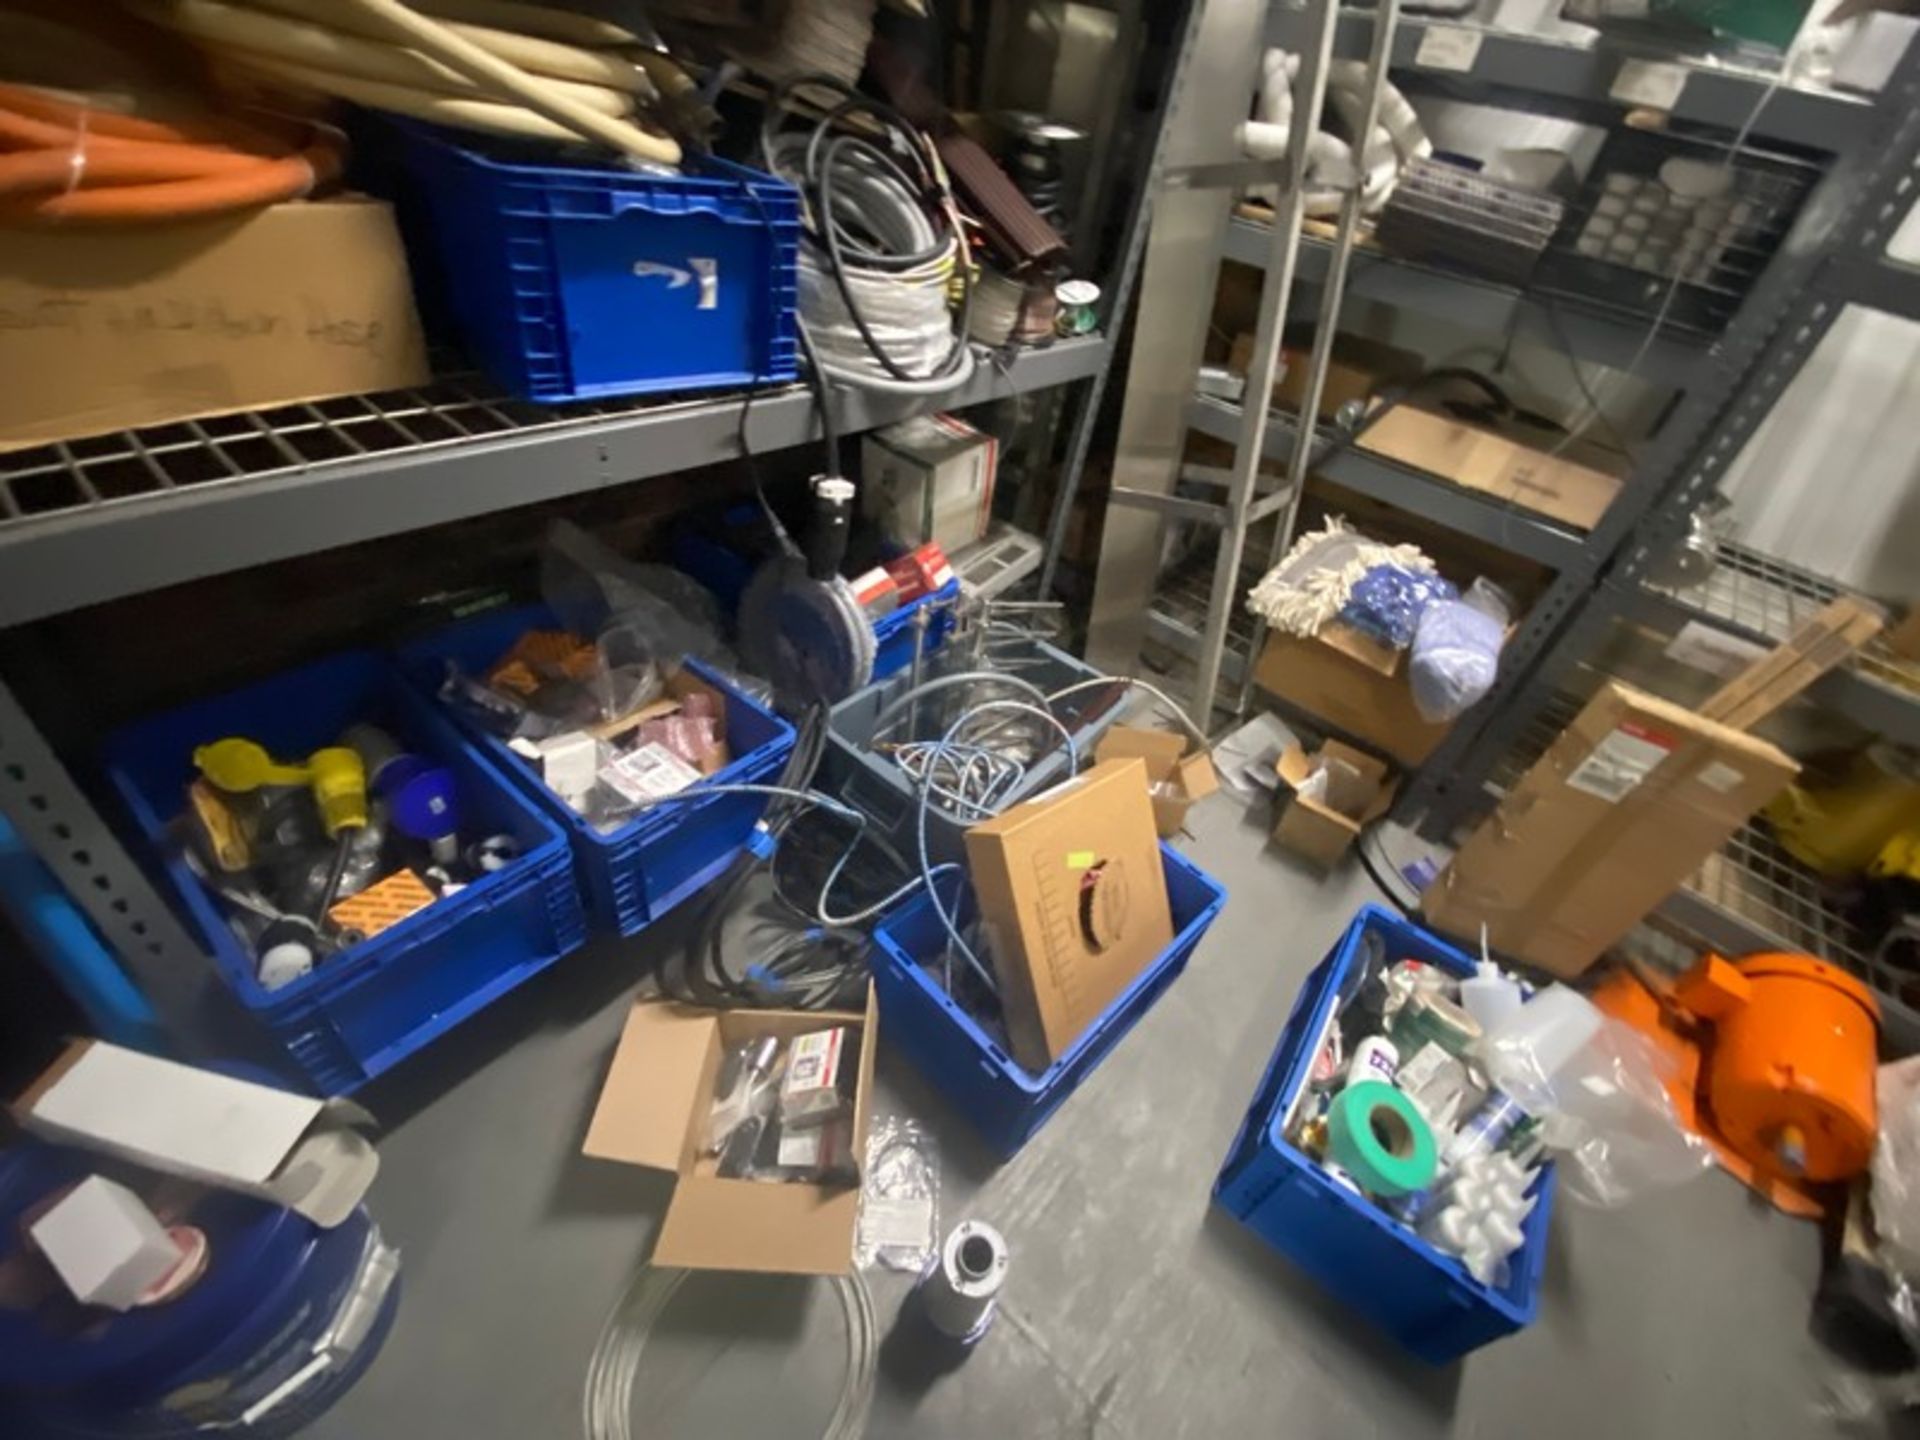 Contents of Back Shelving Area, Includes, Tubing, Electrical Supplies, Scales, Conveyor Parts, - Image 2 of 12